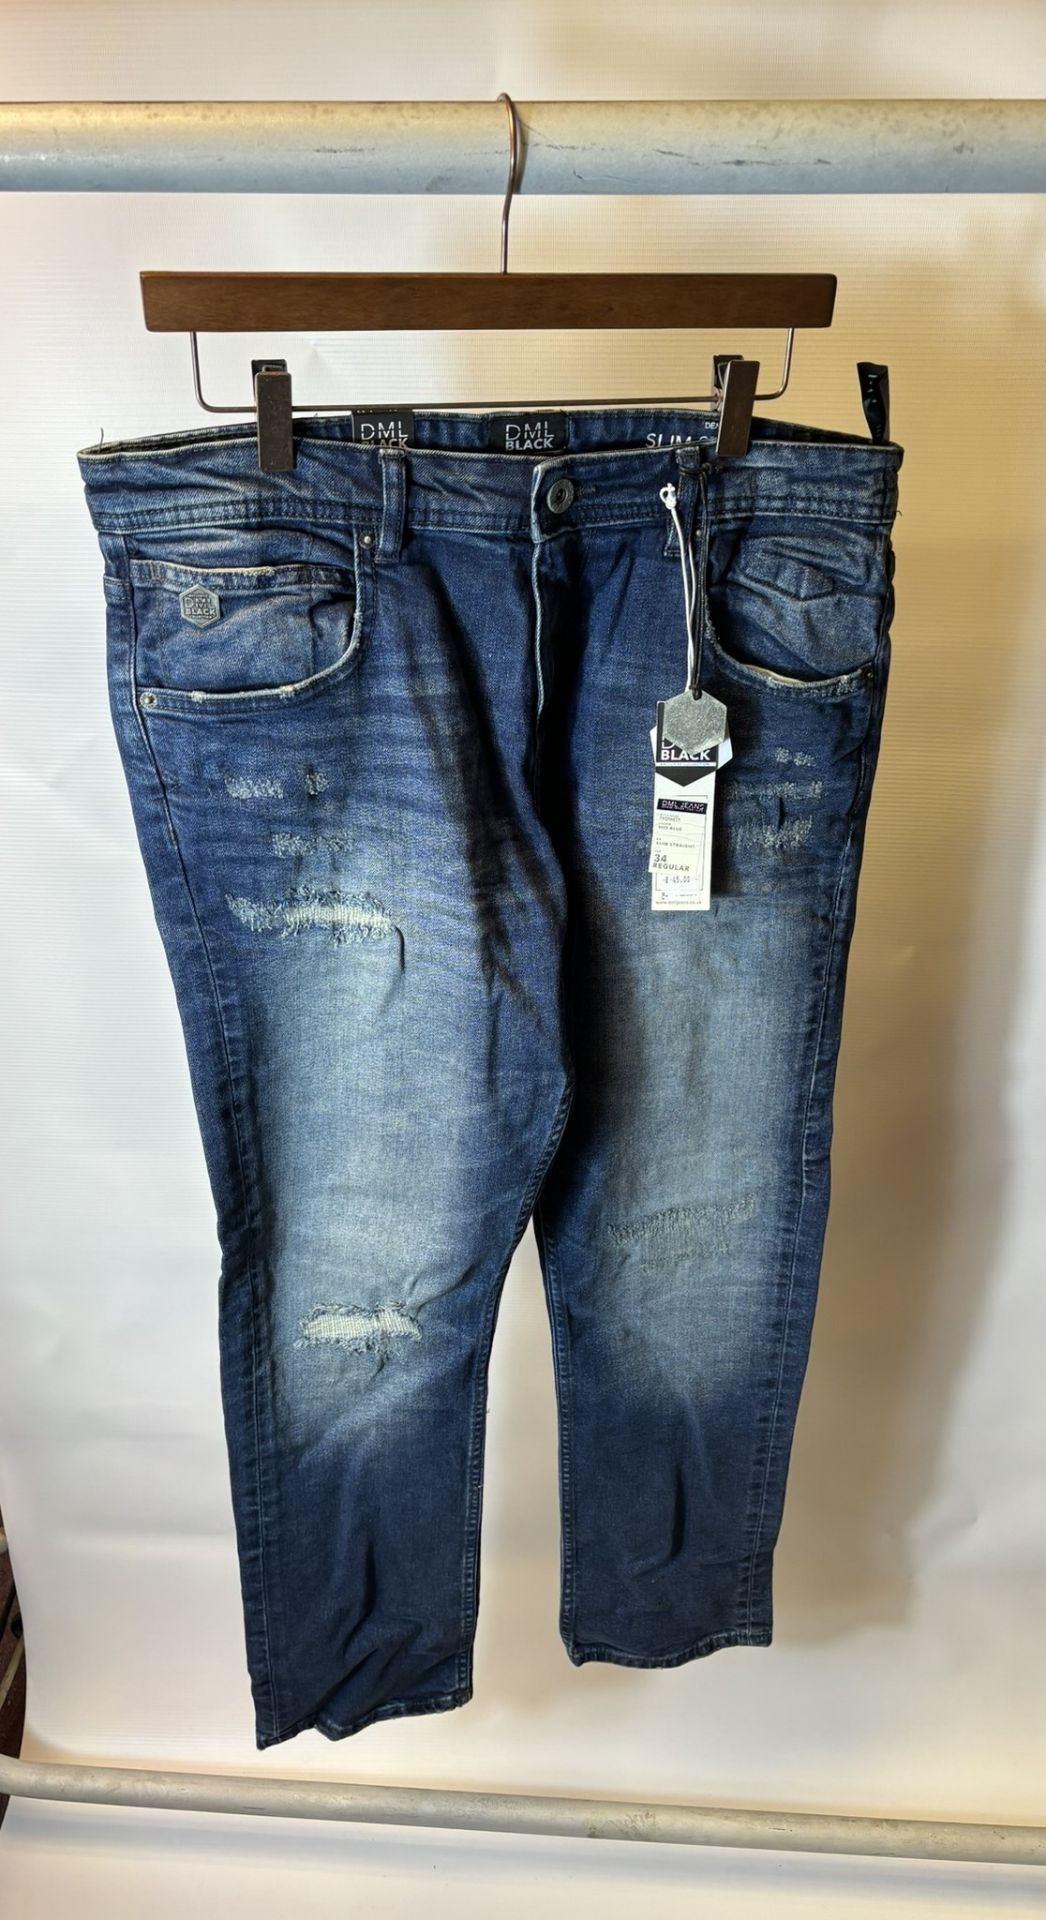 13 x Pairs Of various Sized DML Jeans Prophecy & Voyage Blue Jeans - Image 31 of 39